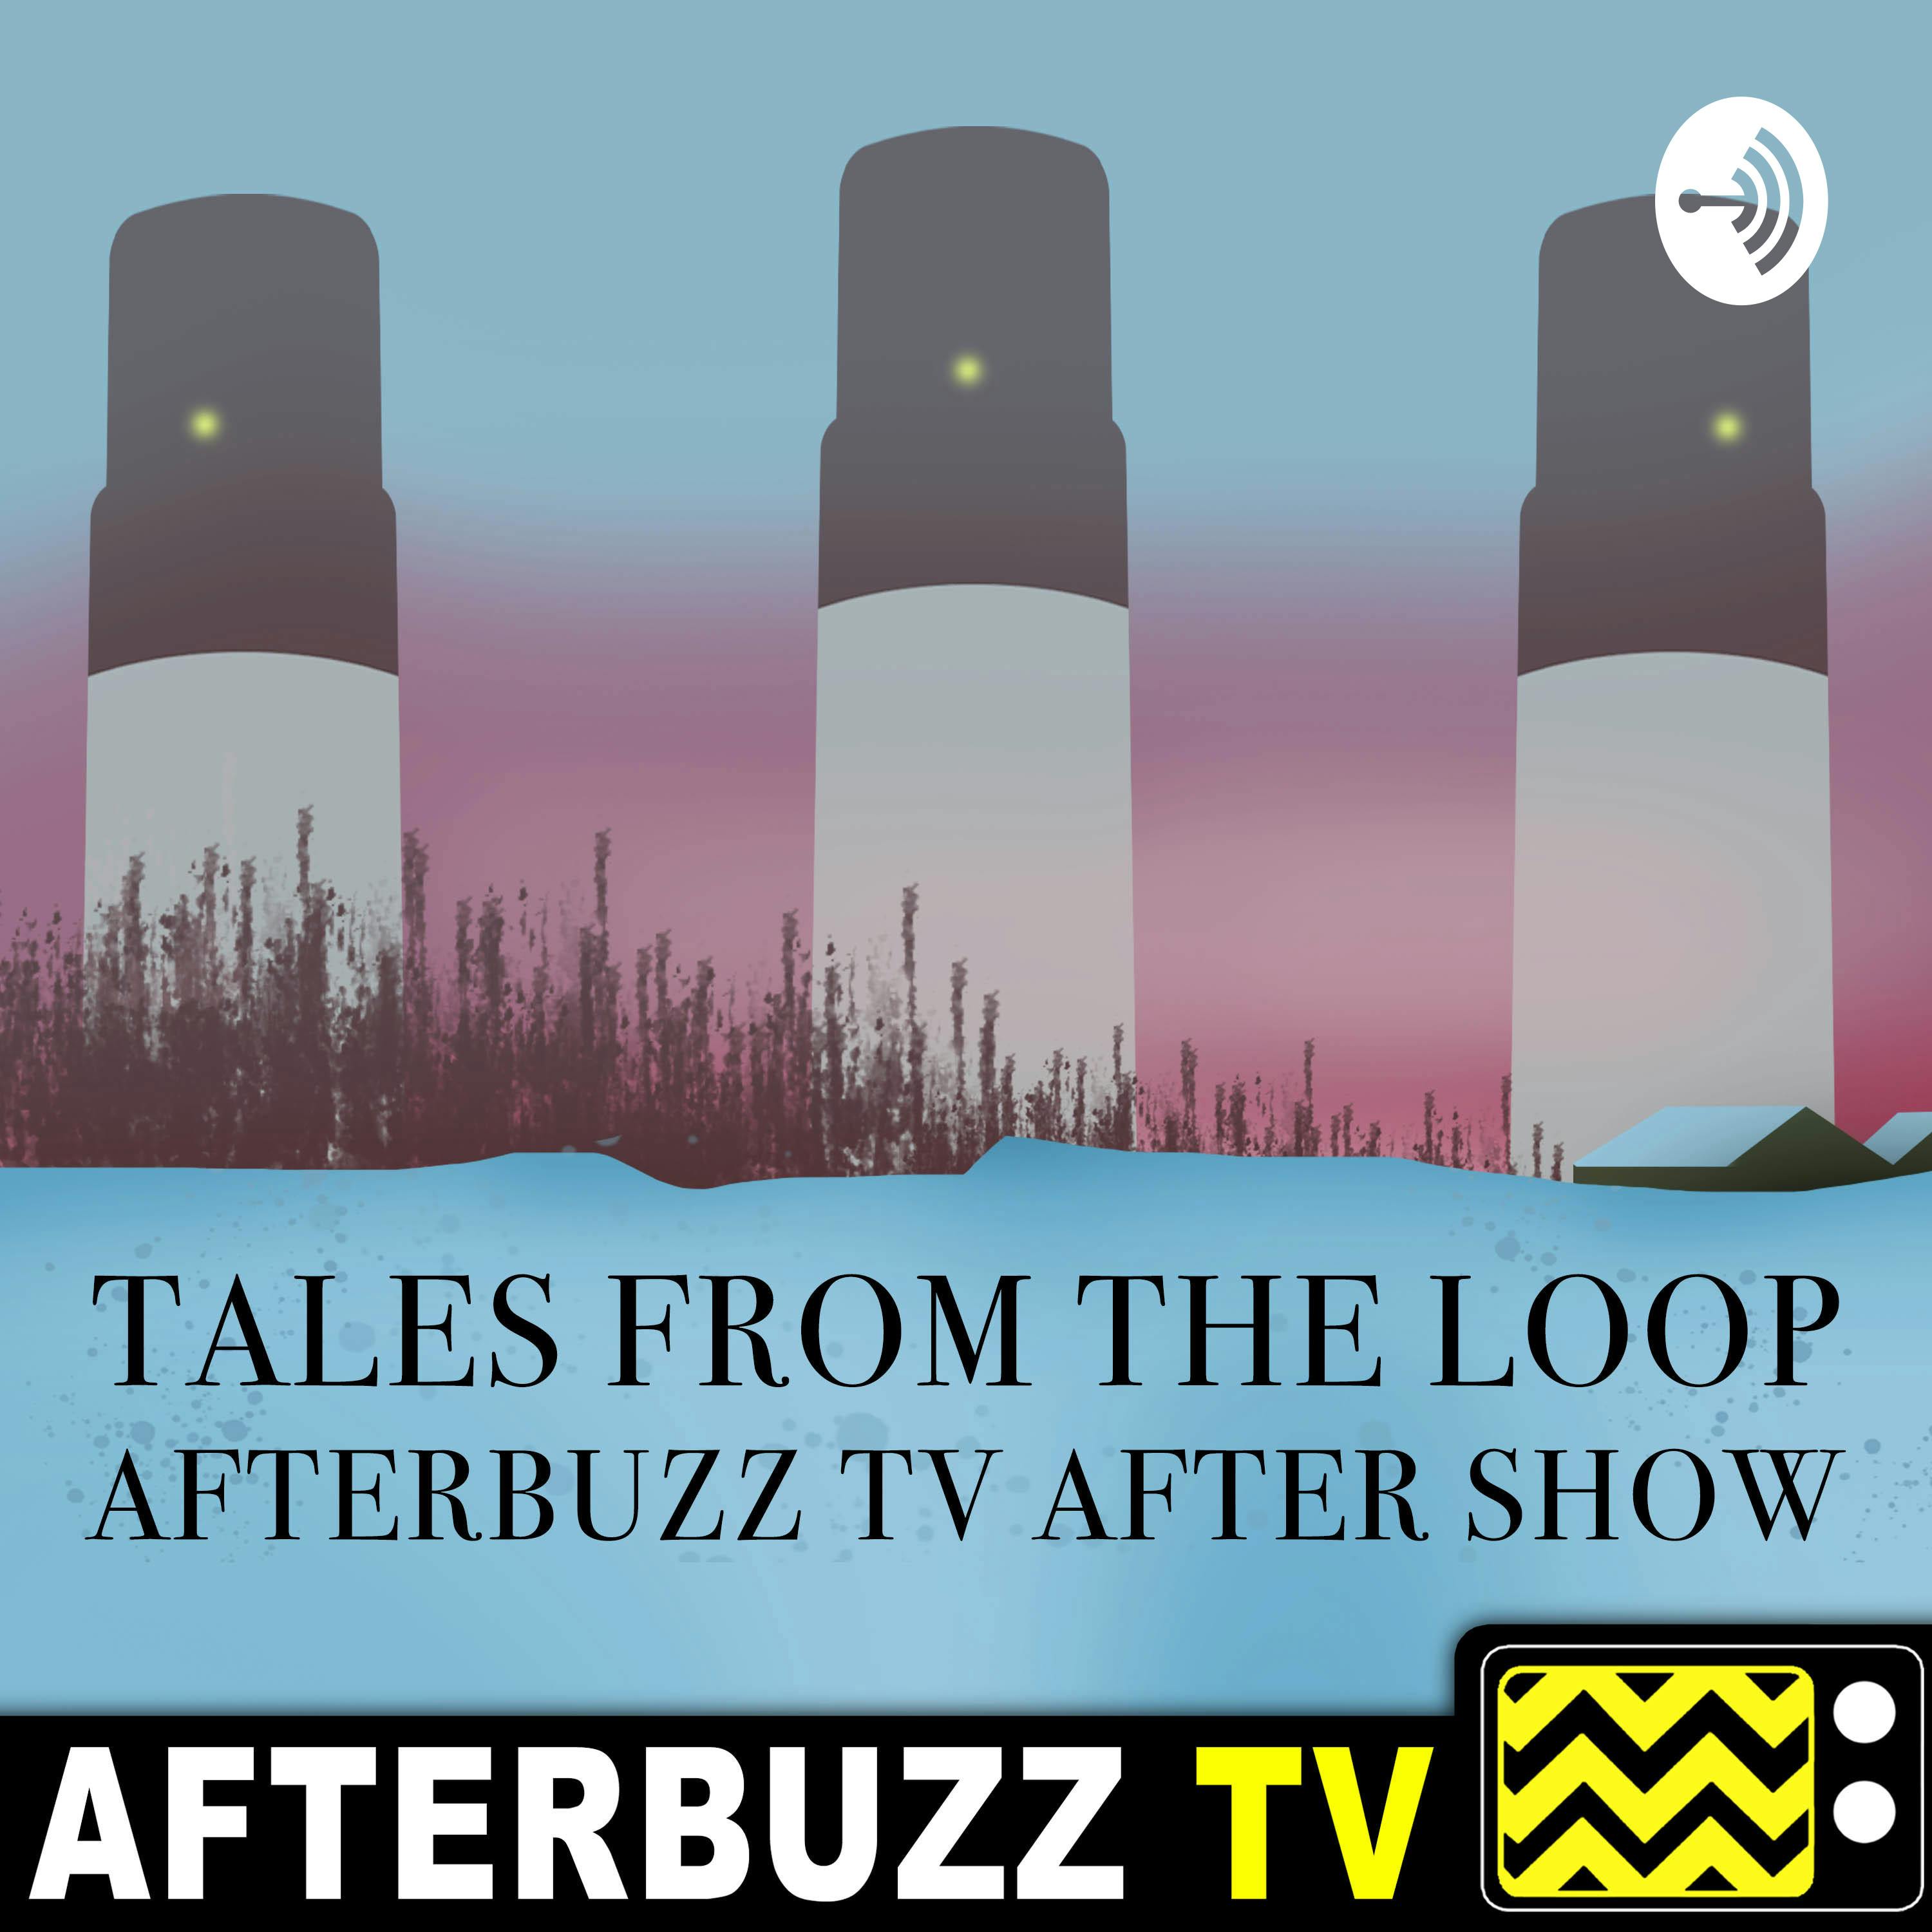 The Forever Date – S1 E3 'Tales From the Loop' Recap & Review